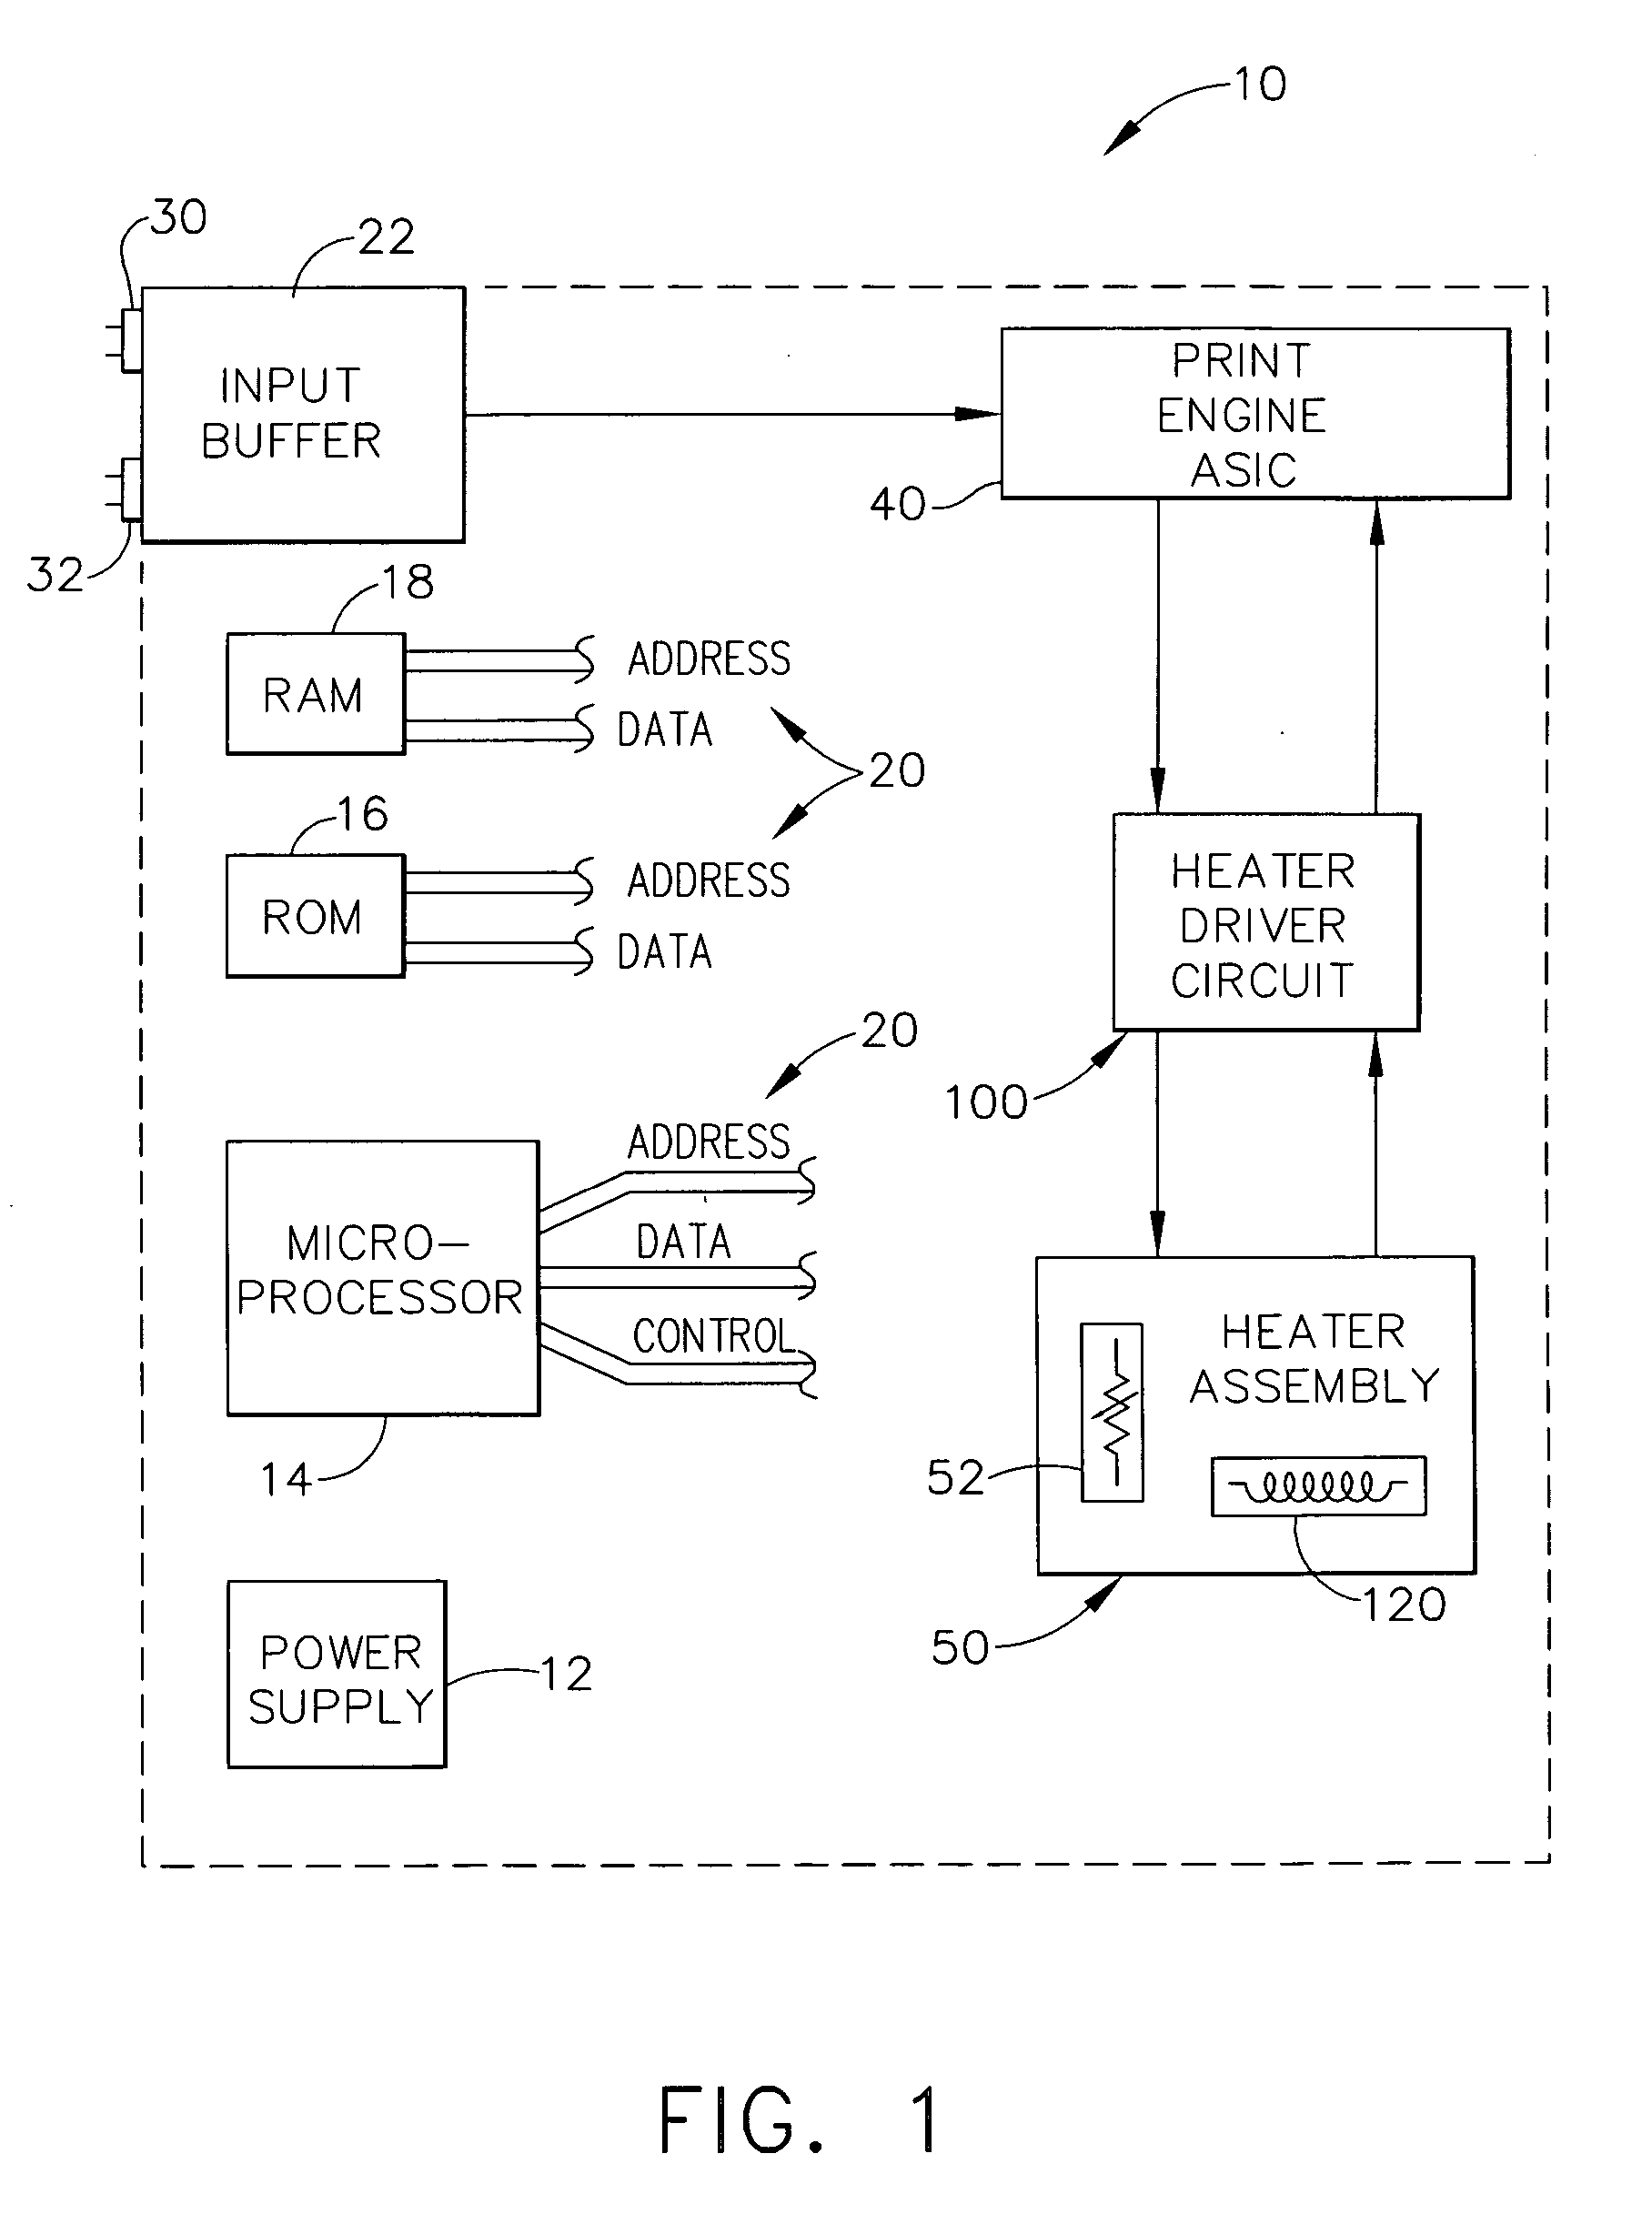 Method and apparatus for controlling temperature of a laser printer fuser with faster response time